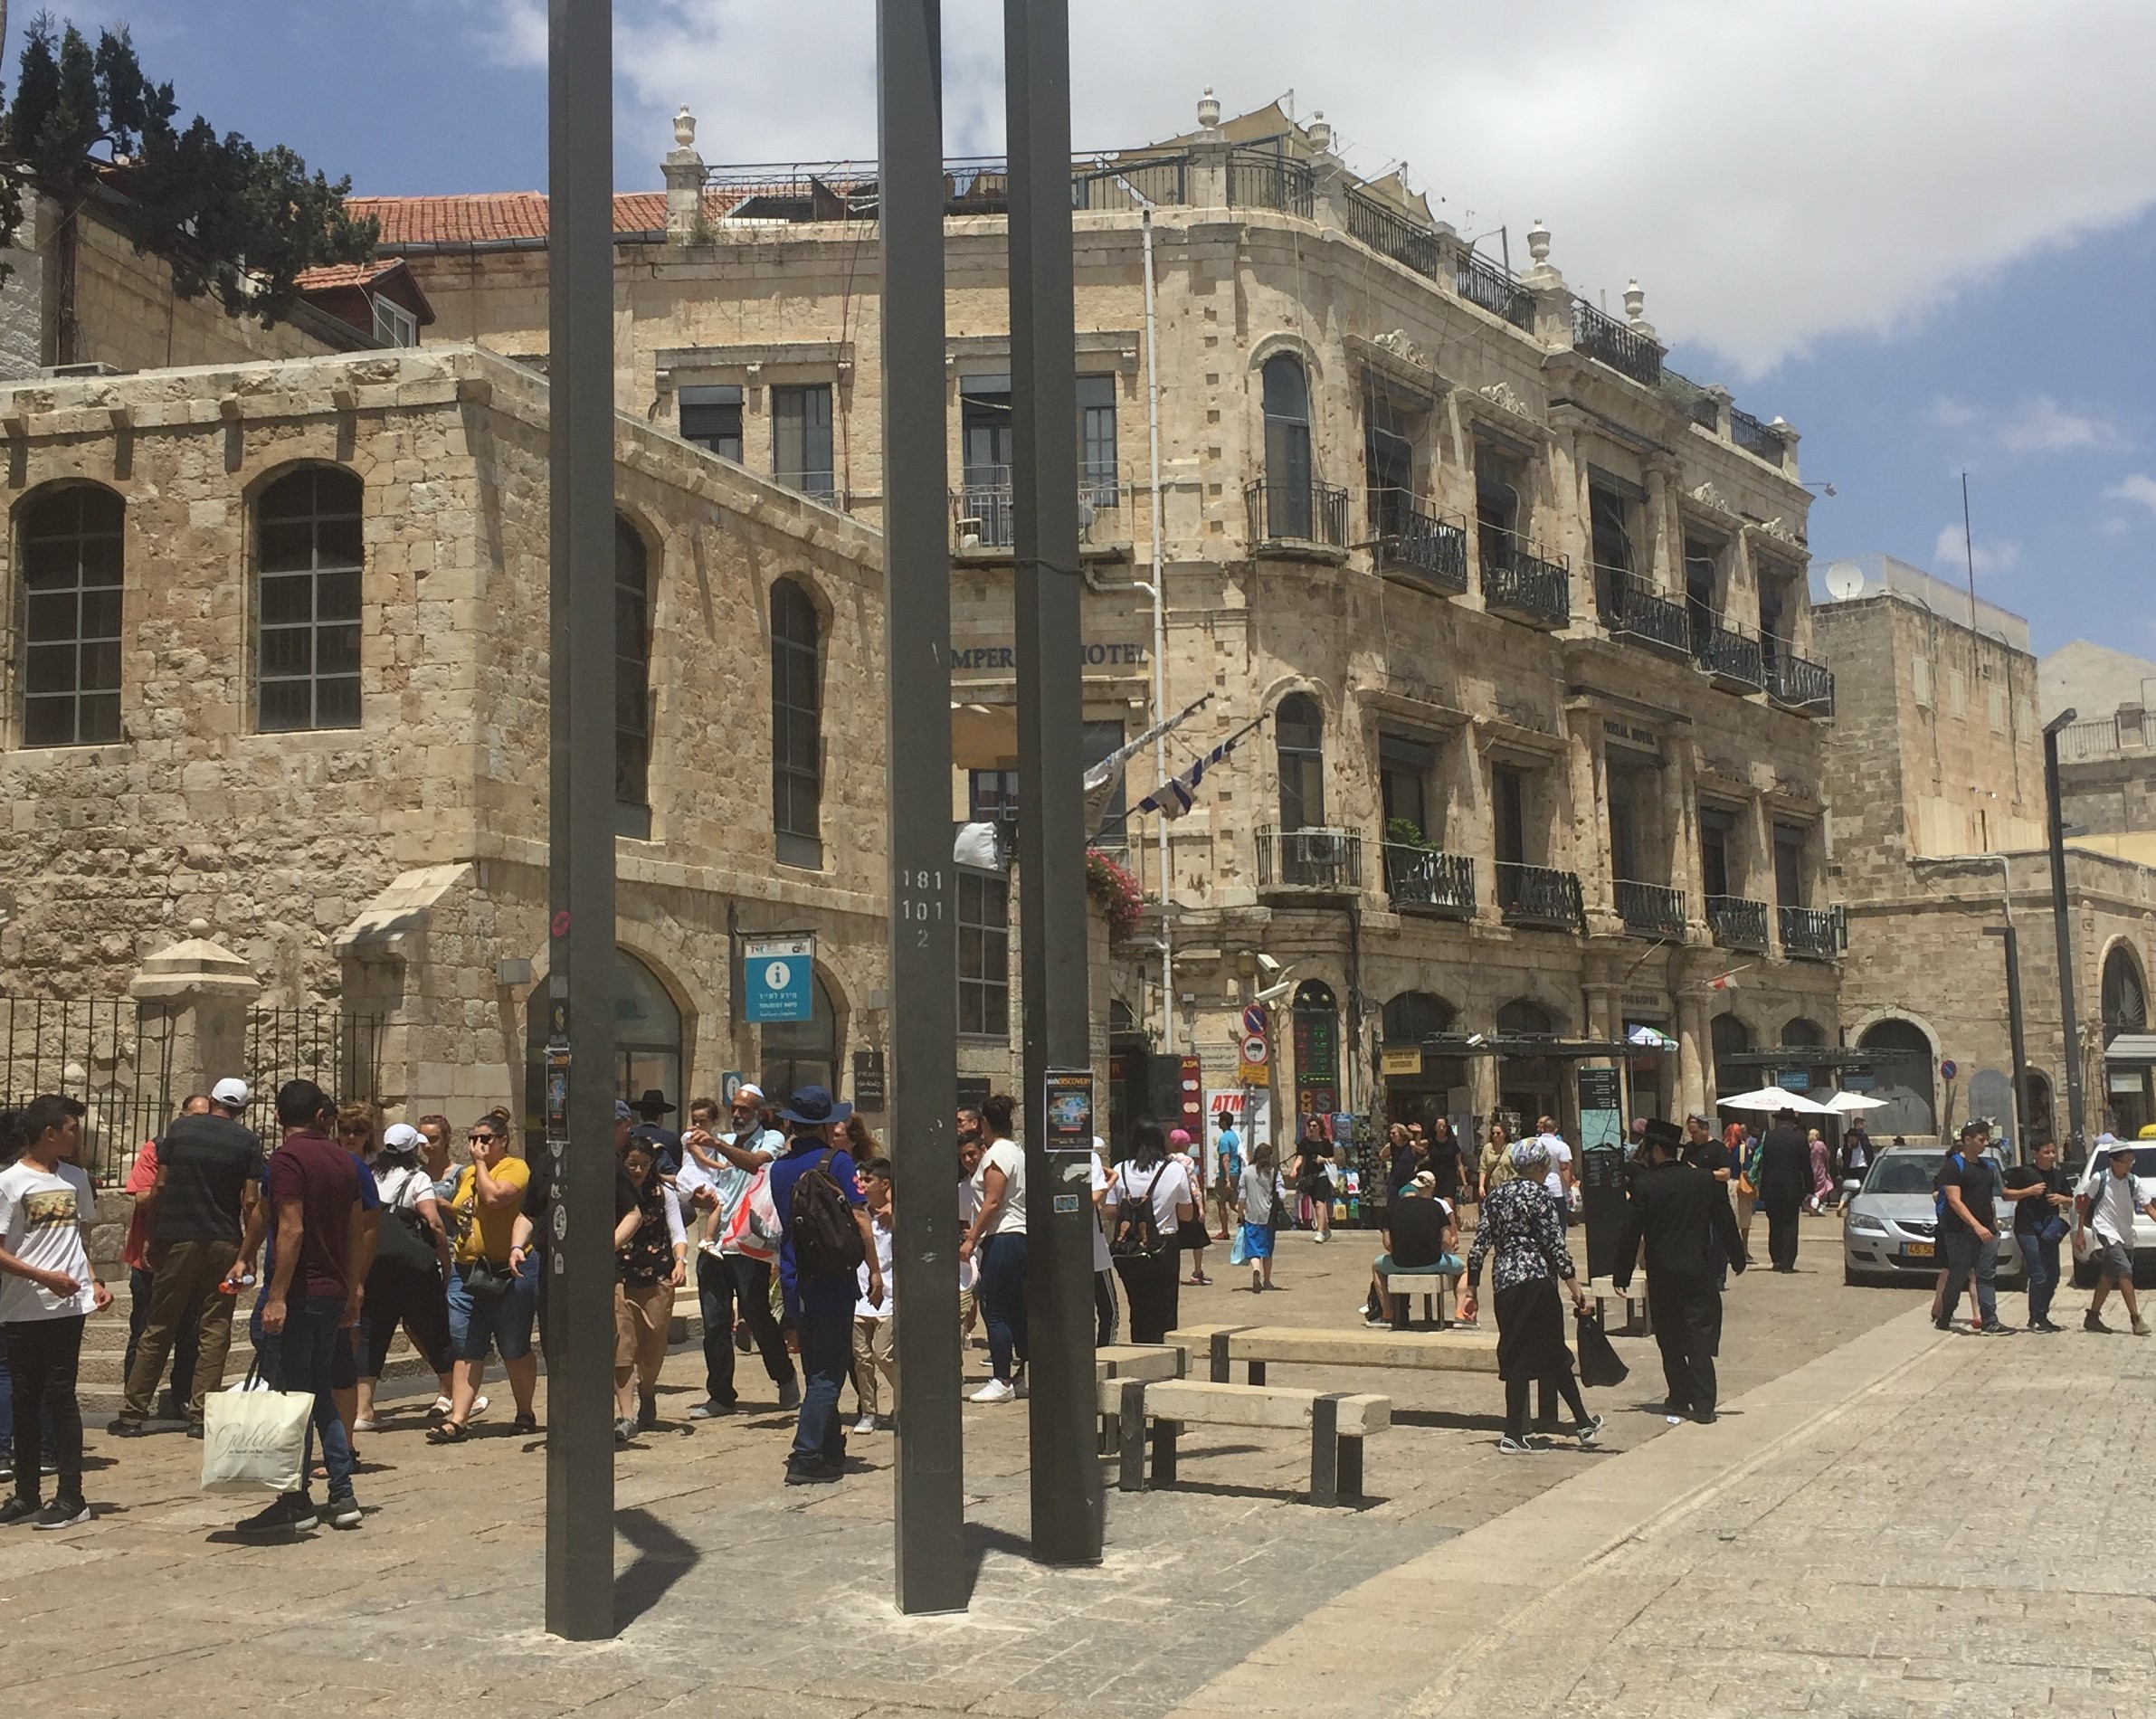 Orthodox Patriarchate of Jerusalem pays more than $600,000 to protect Jaffa Gate properties